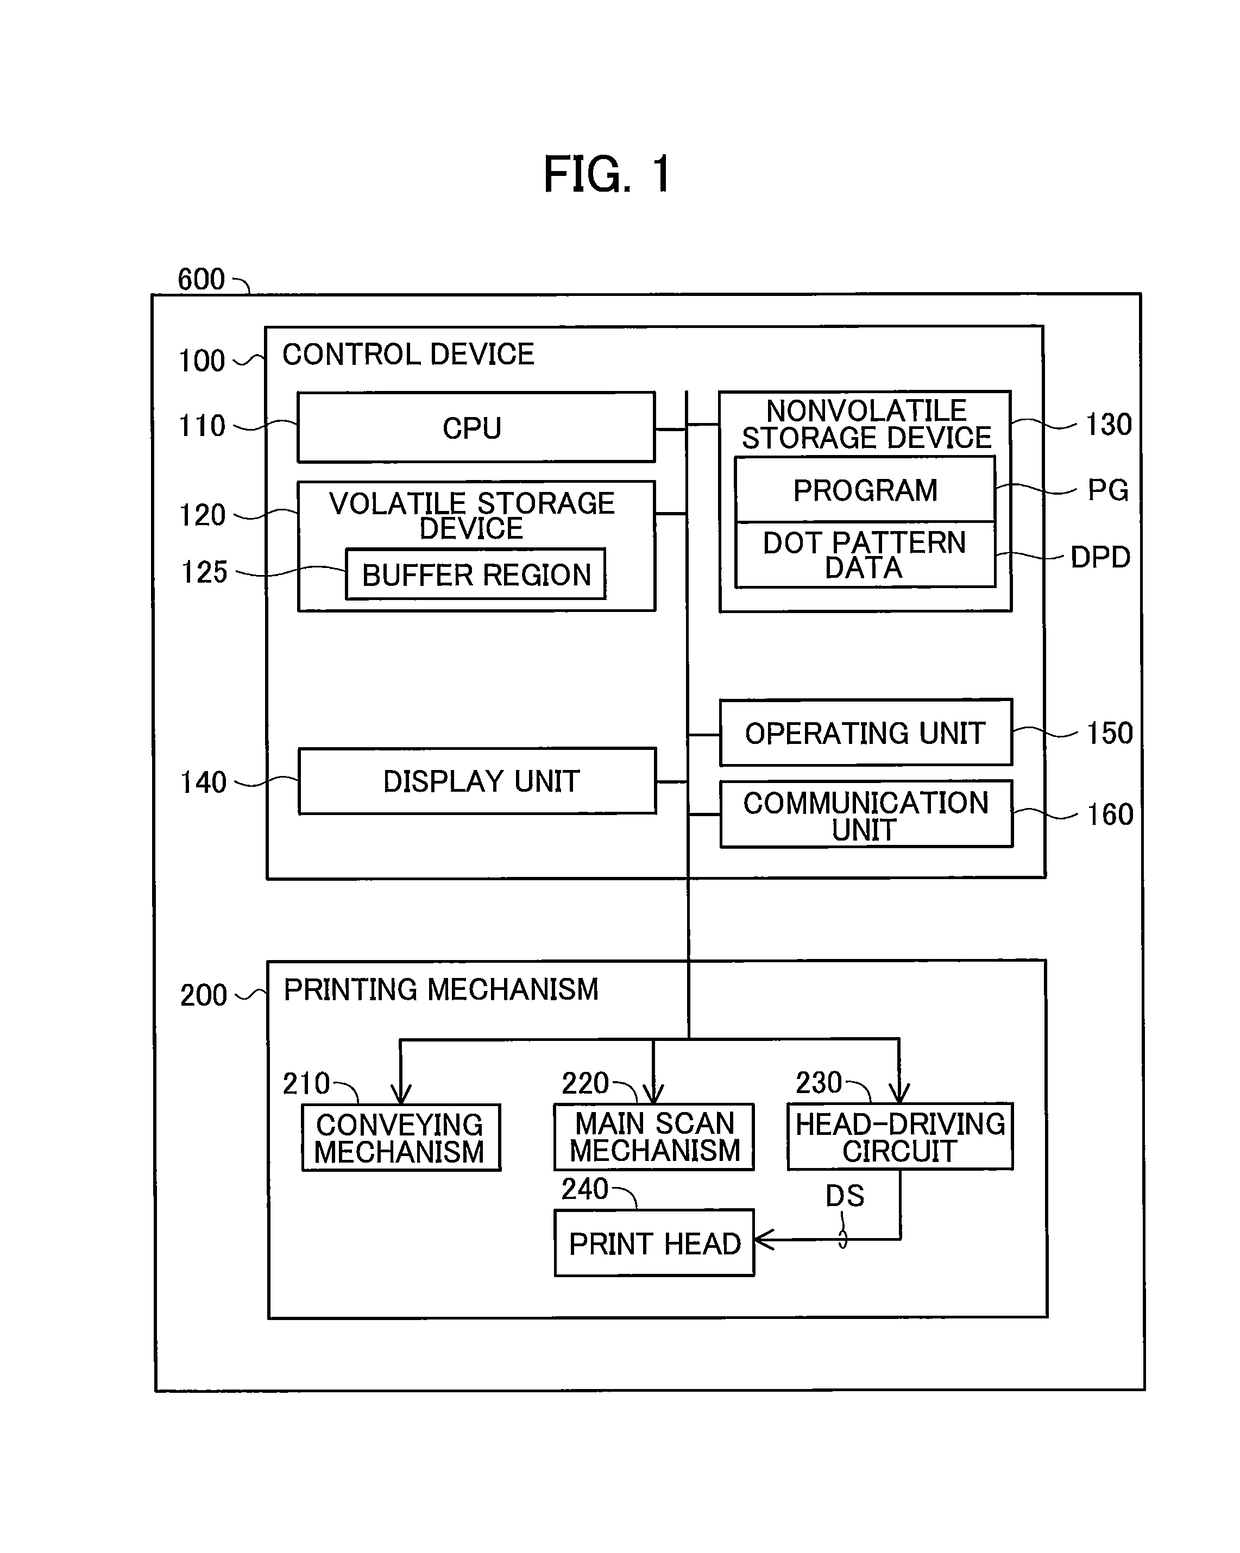 Control device for controlling printer to execute multi-pass printing